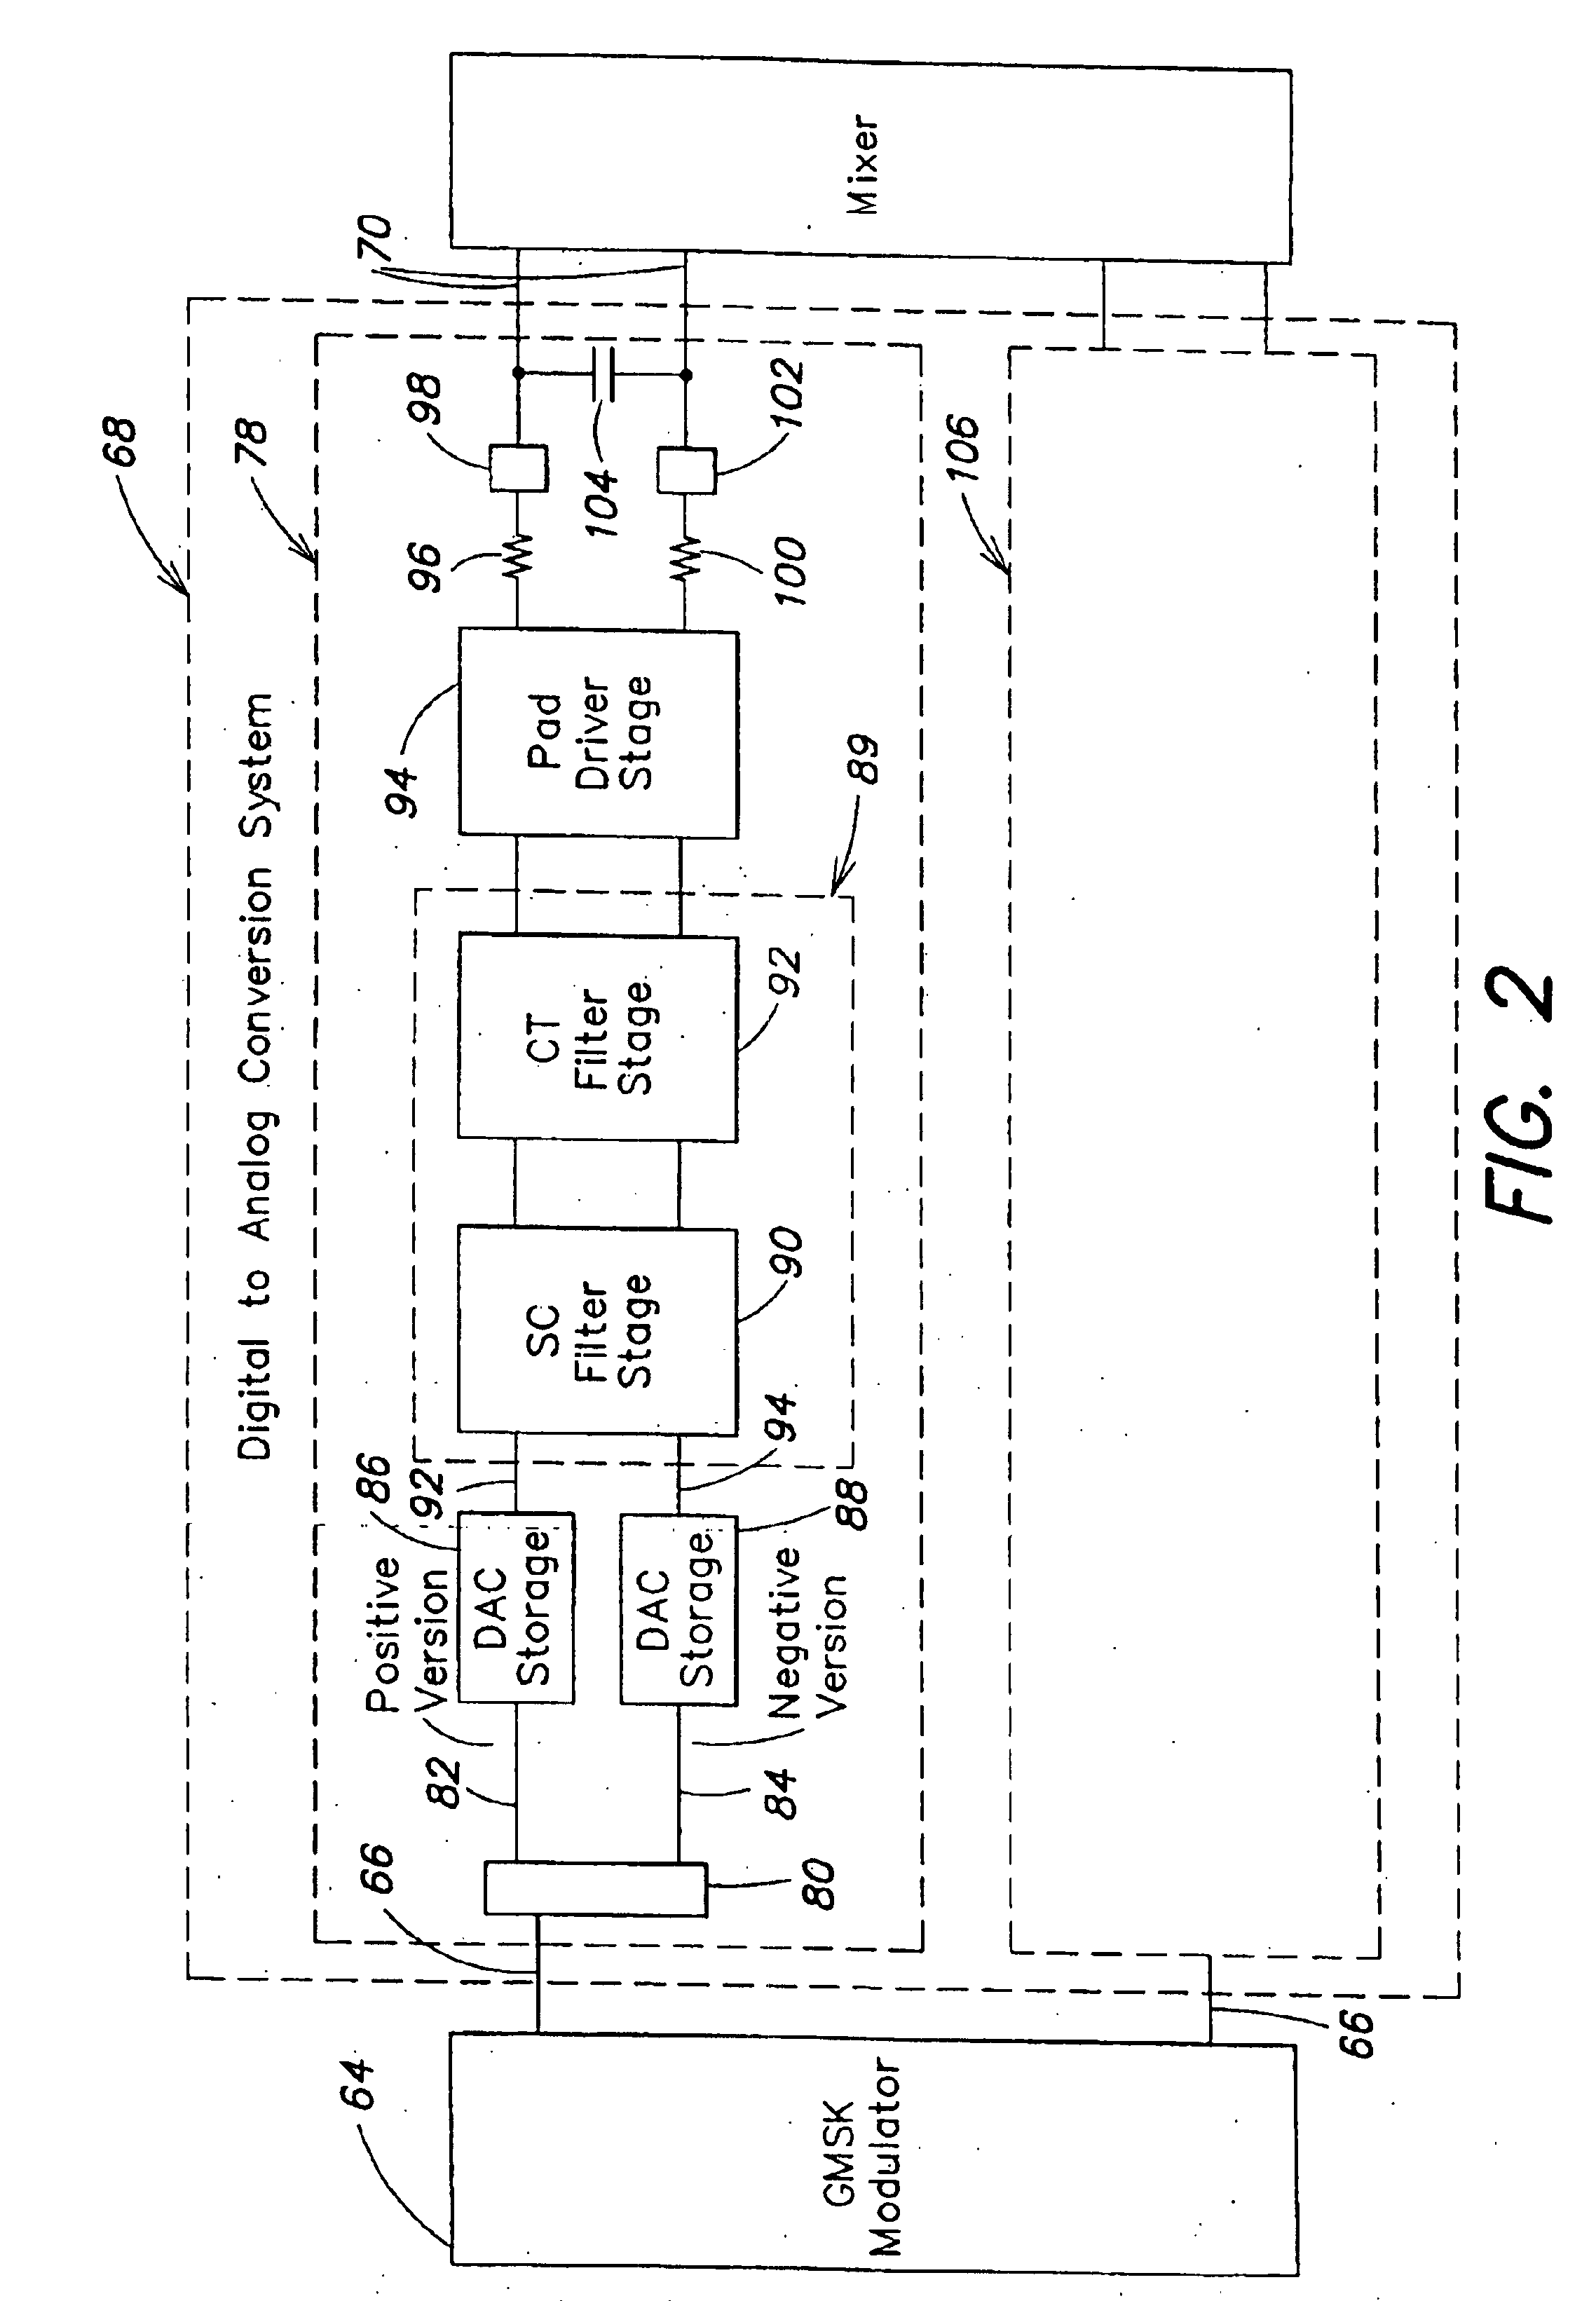 Method and apparatus for use in switched capacitor systems